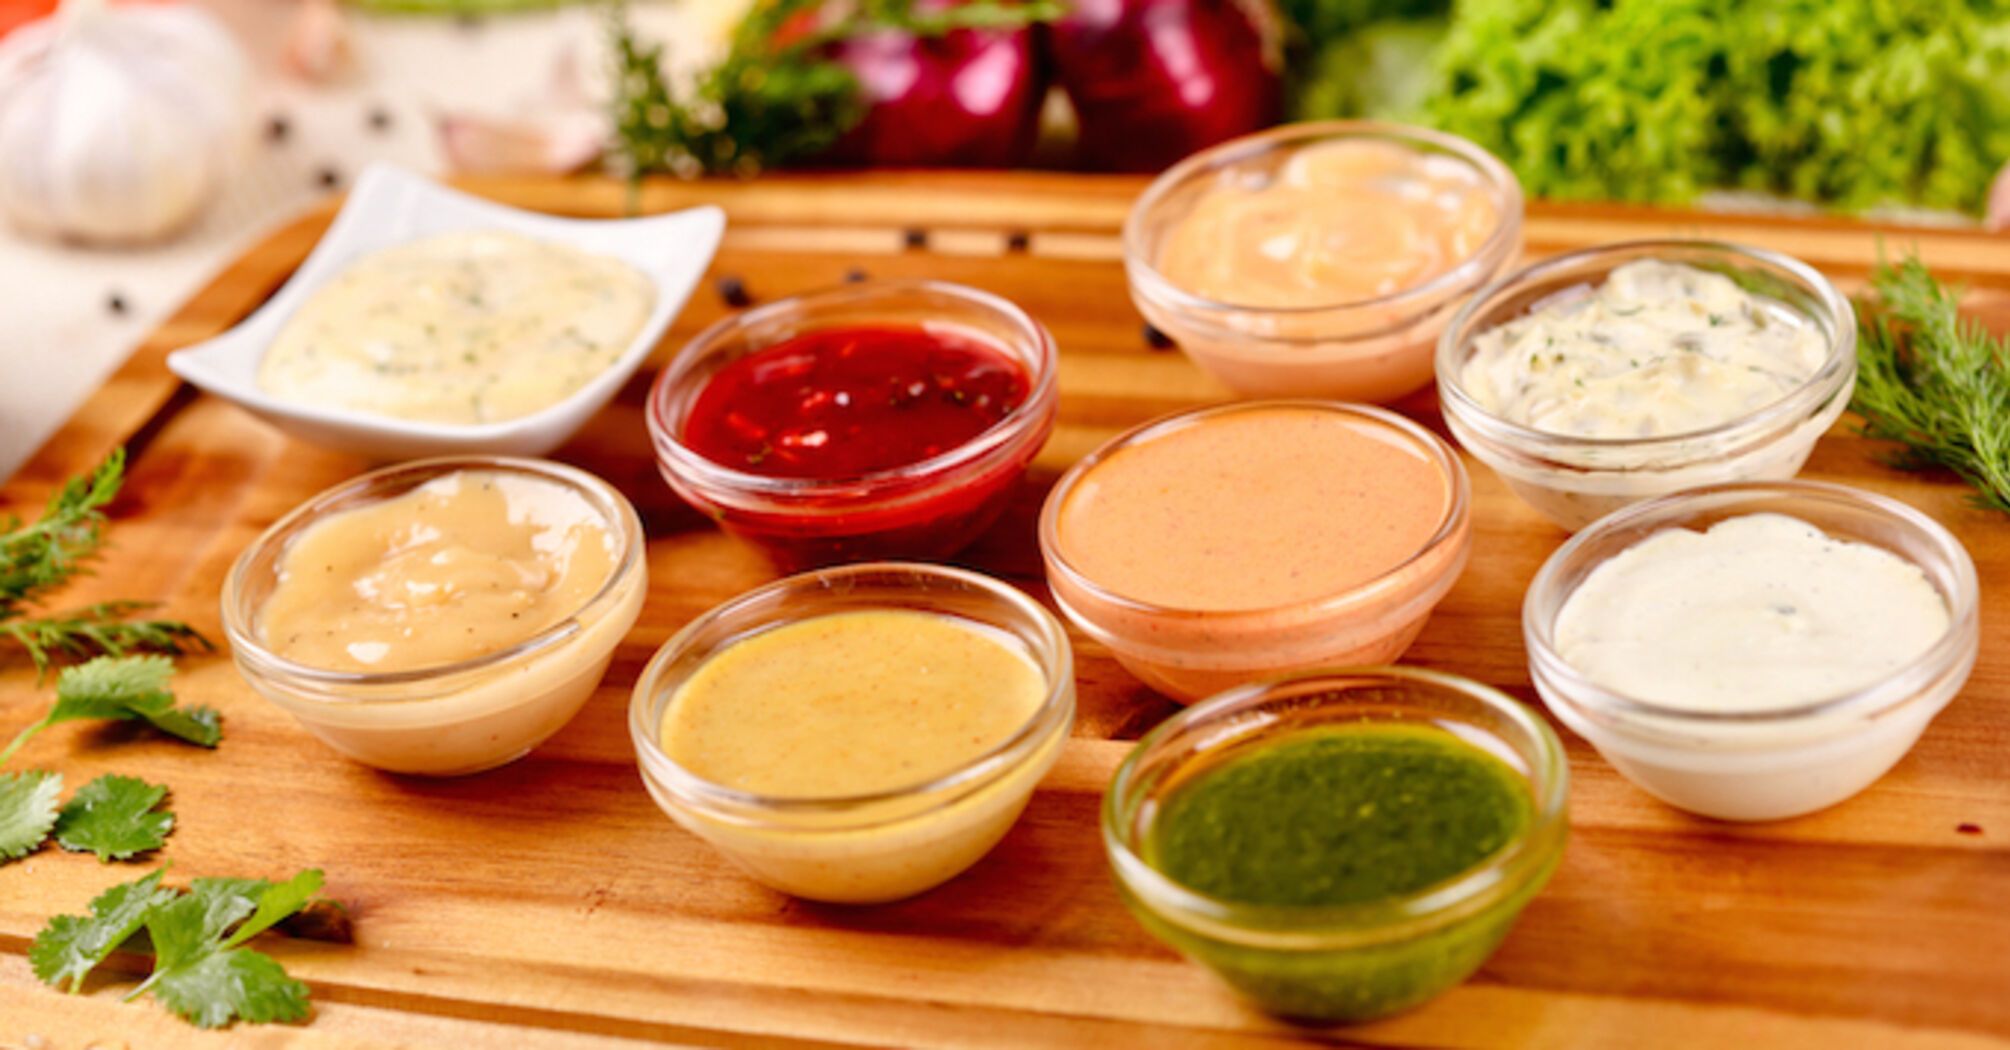 The most delicious summer sauces that will complete the taste of any dish: top 5